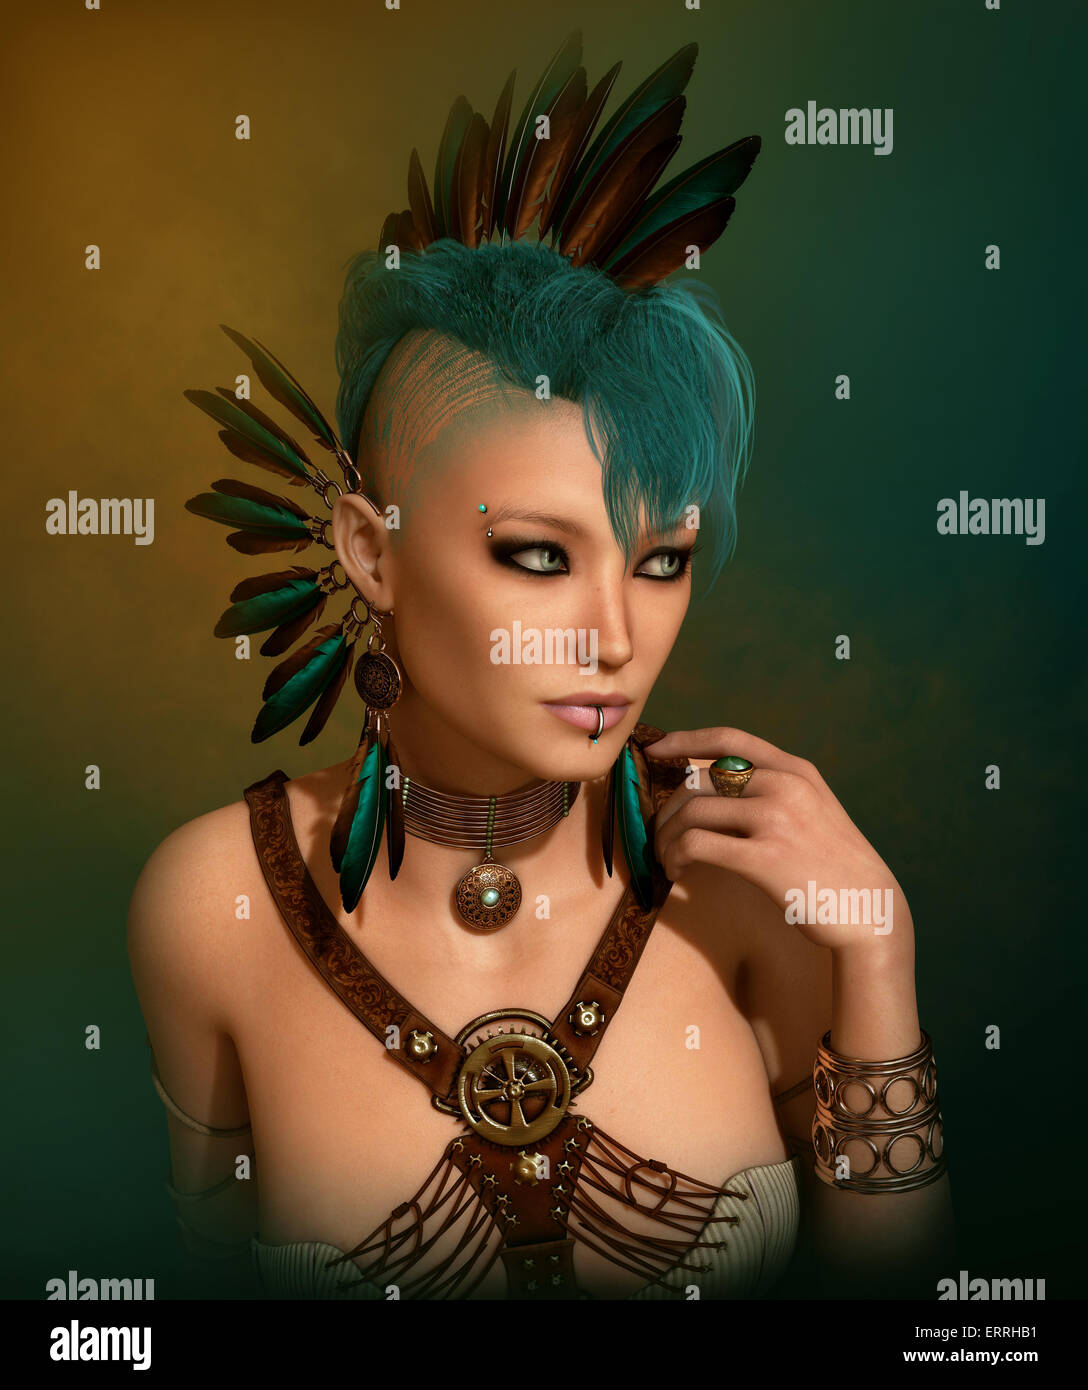 3d computer graphics of a young woman with a Steampunk outfit, feather jewelry and a Mohawk hairstyle Stock Photo